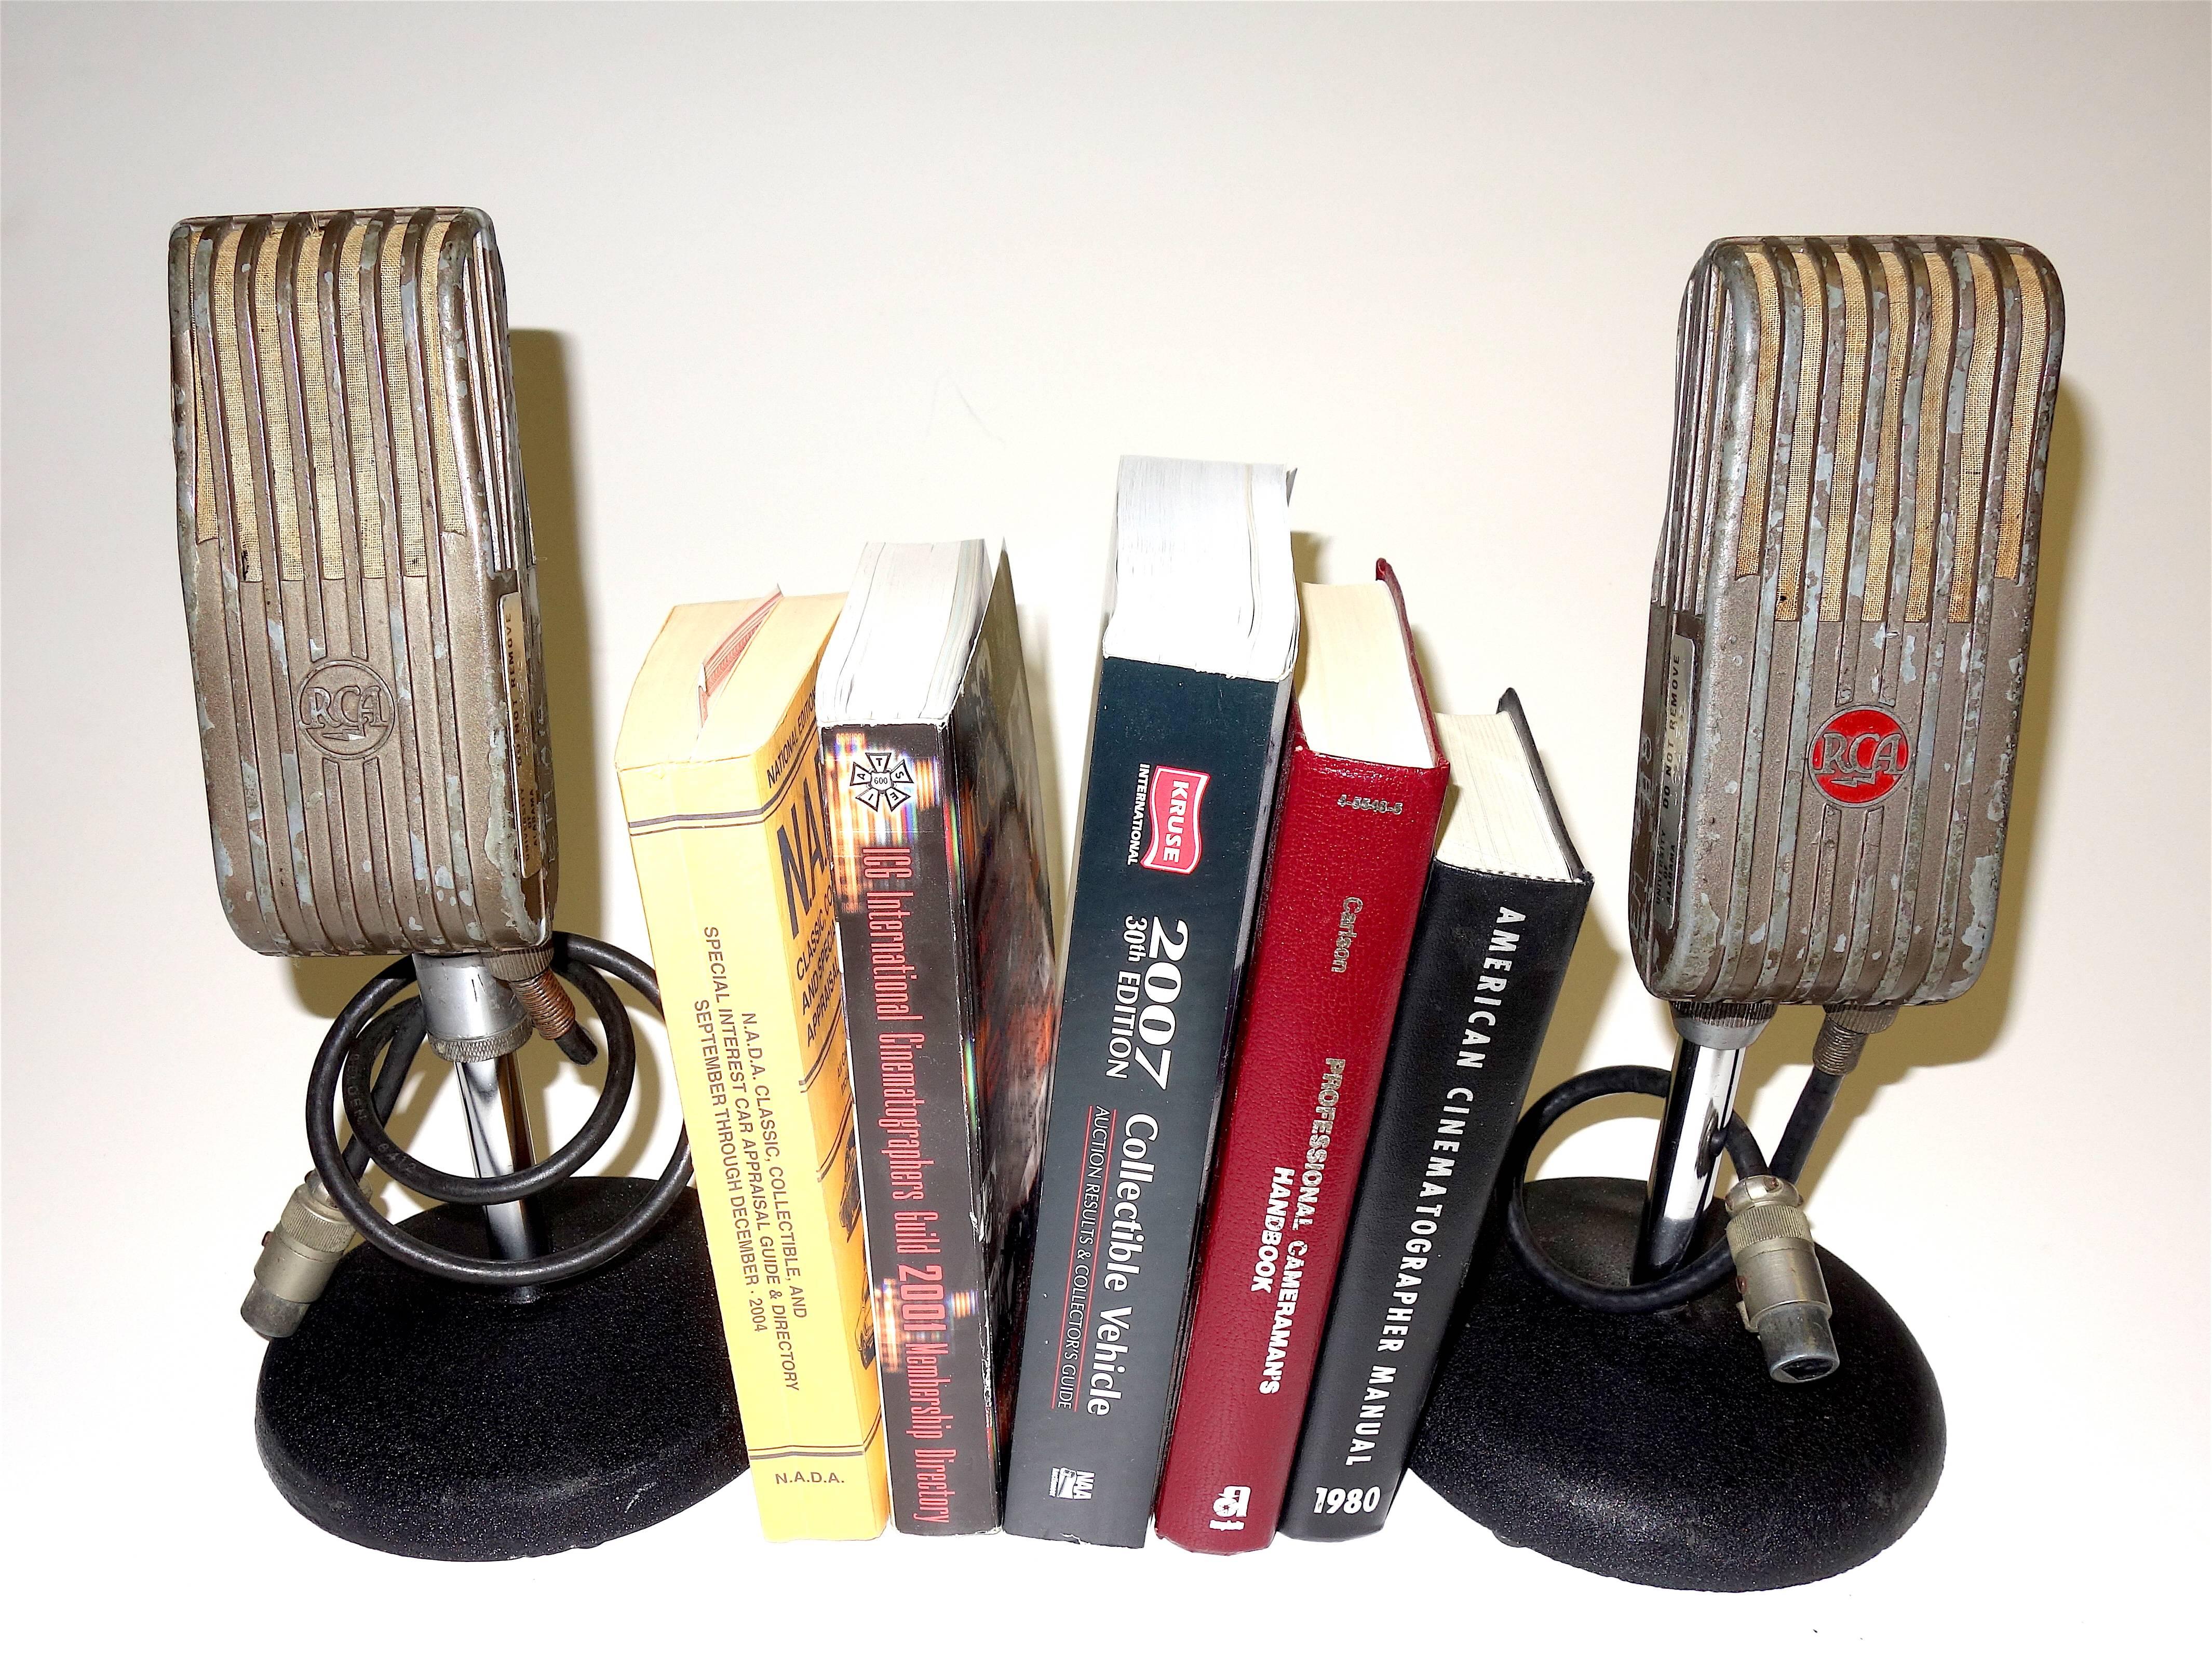 American RCA Broadcast Microphones, 1945. As Bookends or Display As Sculpture. ON SALE For Sale